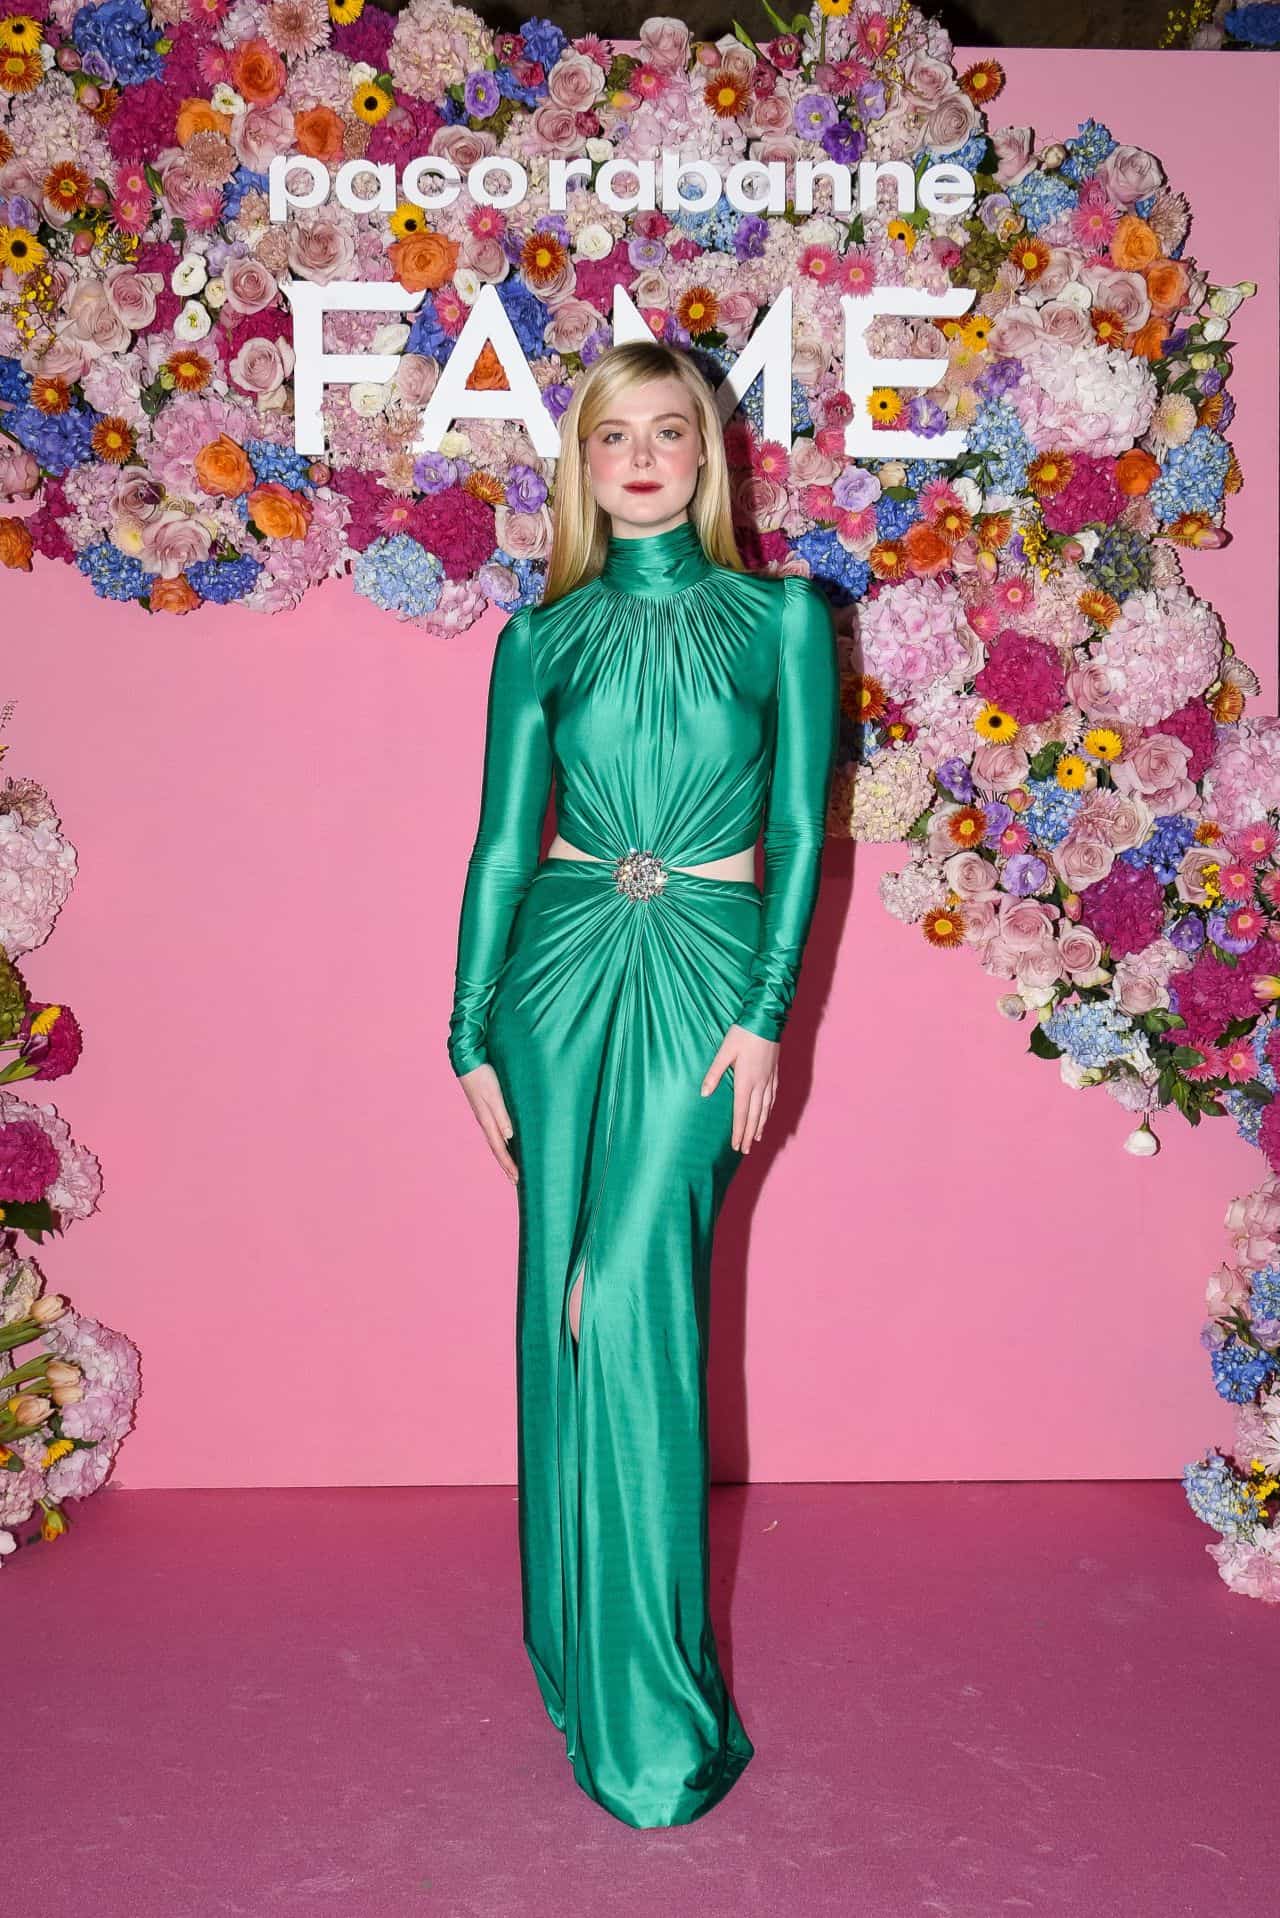 Elle Fanning Steps Out in Emerald Green Dress at Paco Rabanne “FAME” Event